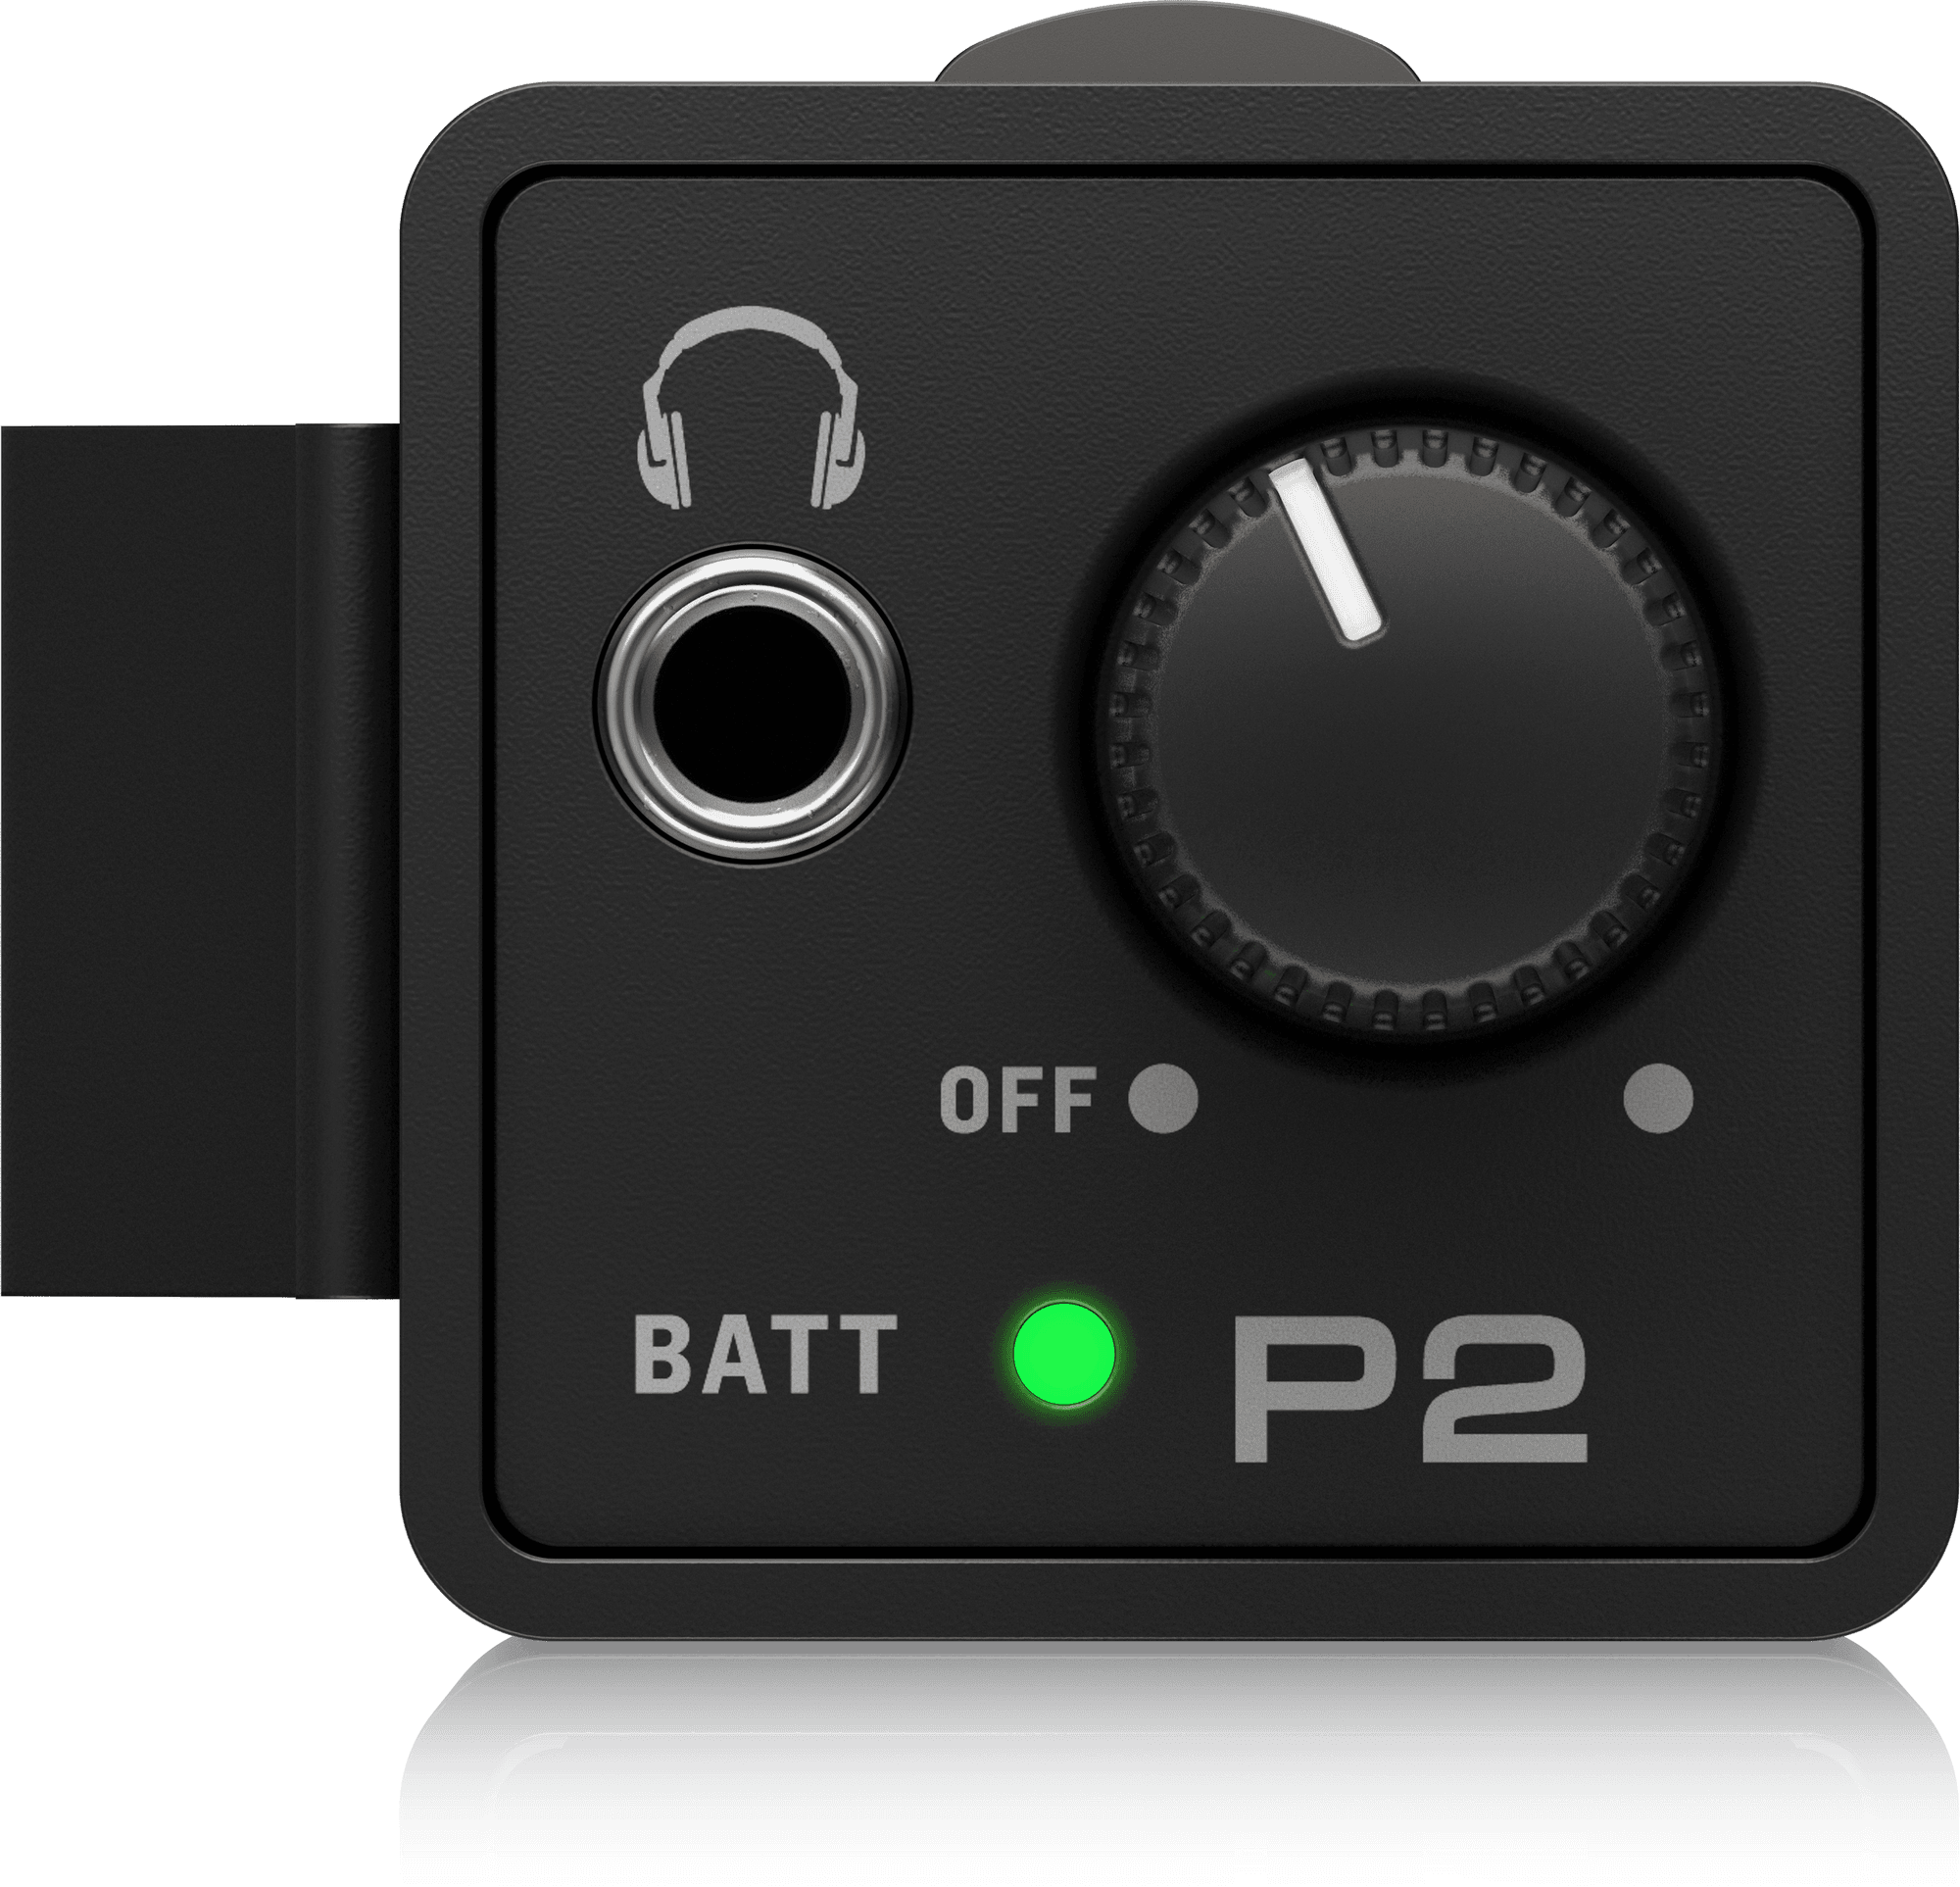 Behringer P2 Ultra-Compact Personal In-Ear Monitor Amplifier (P-2) | BEHRINGER , Zoso Music